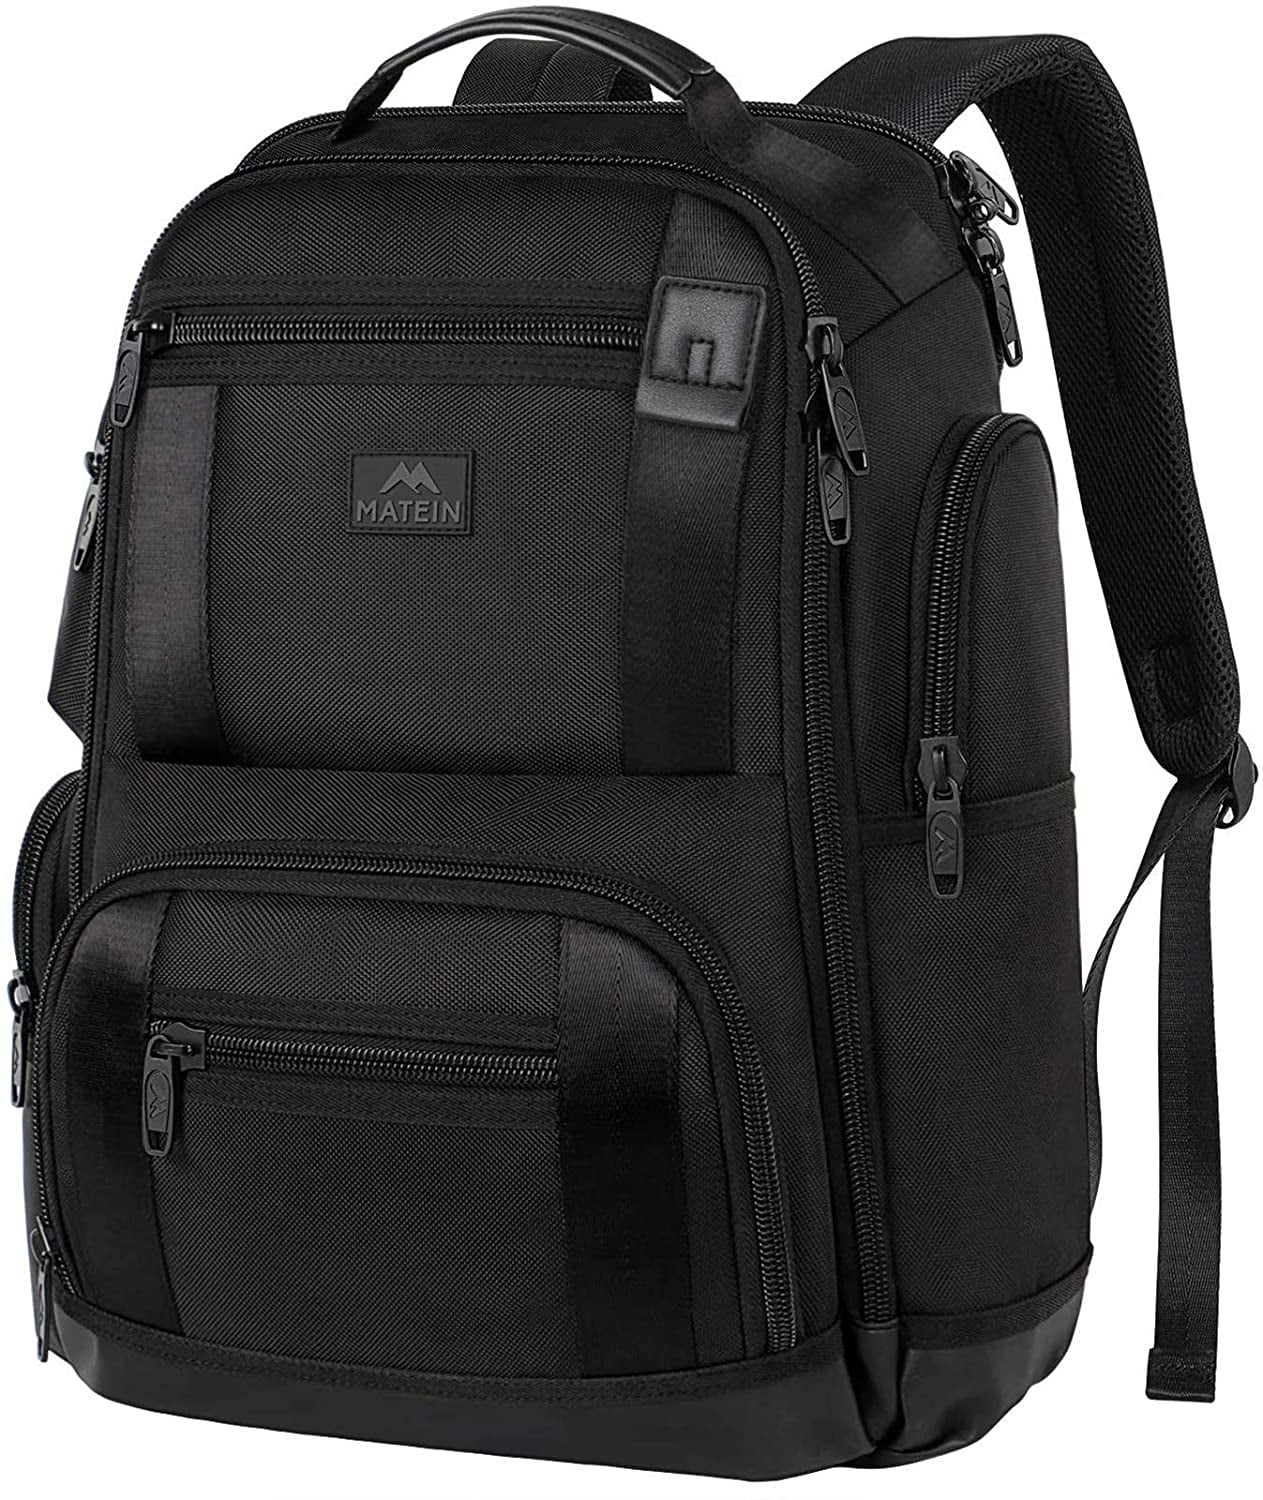 Matein 17 inch Laptop Bag TSA-Friendly Carry-On Travel Laptop Backpack ...